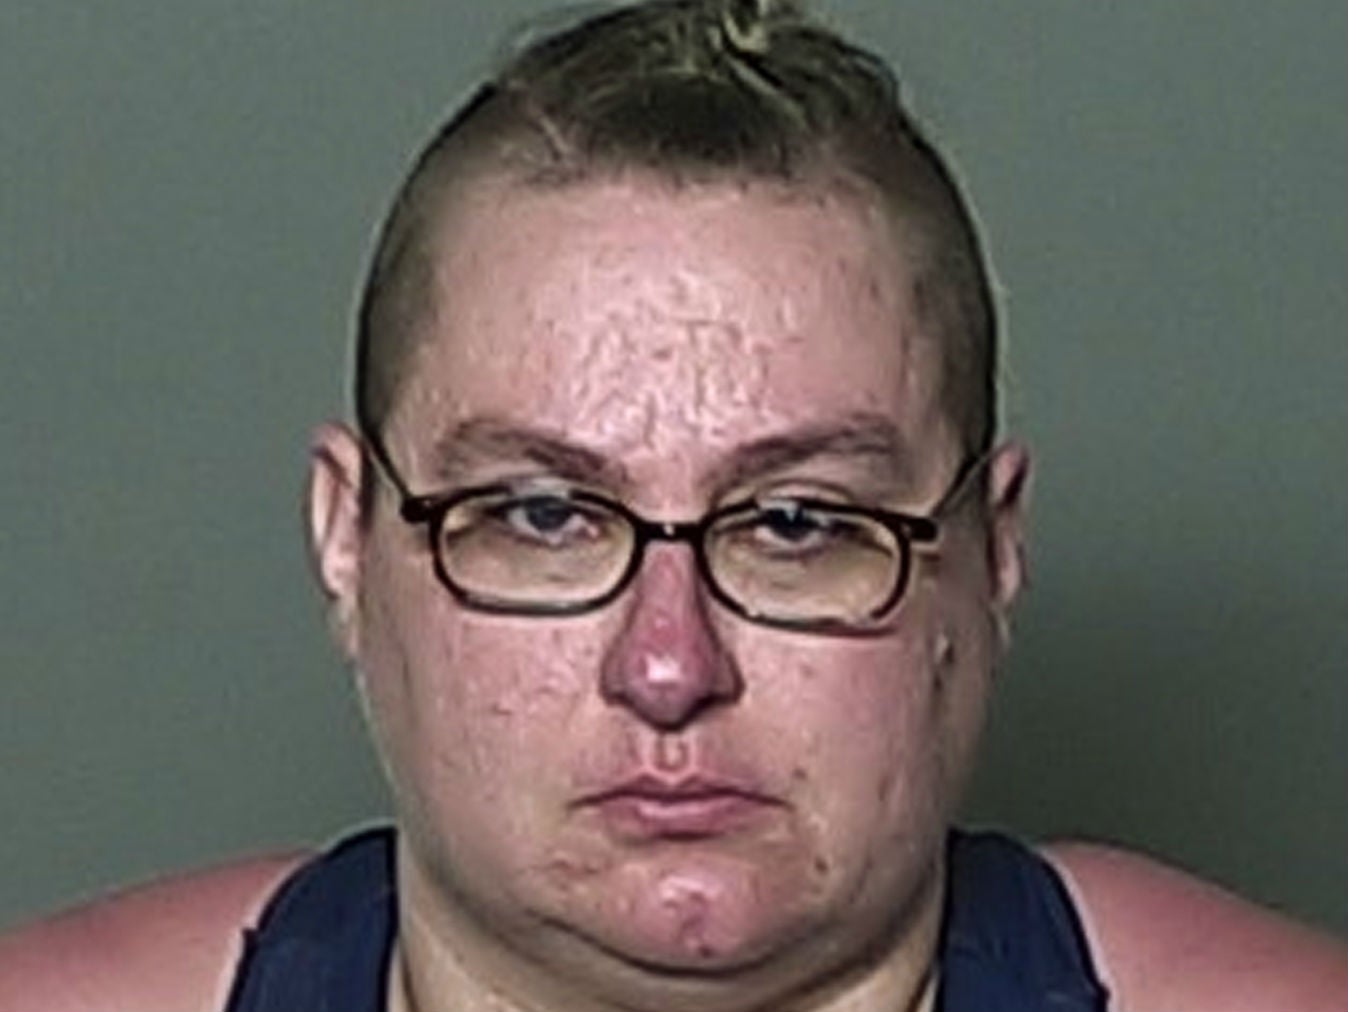 Nicole Gussert has been charged with child neglect in her 13-year-old daughter's death